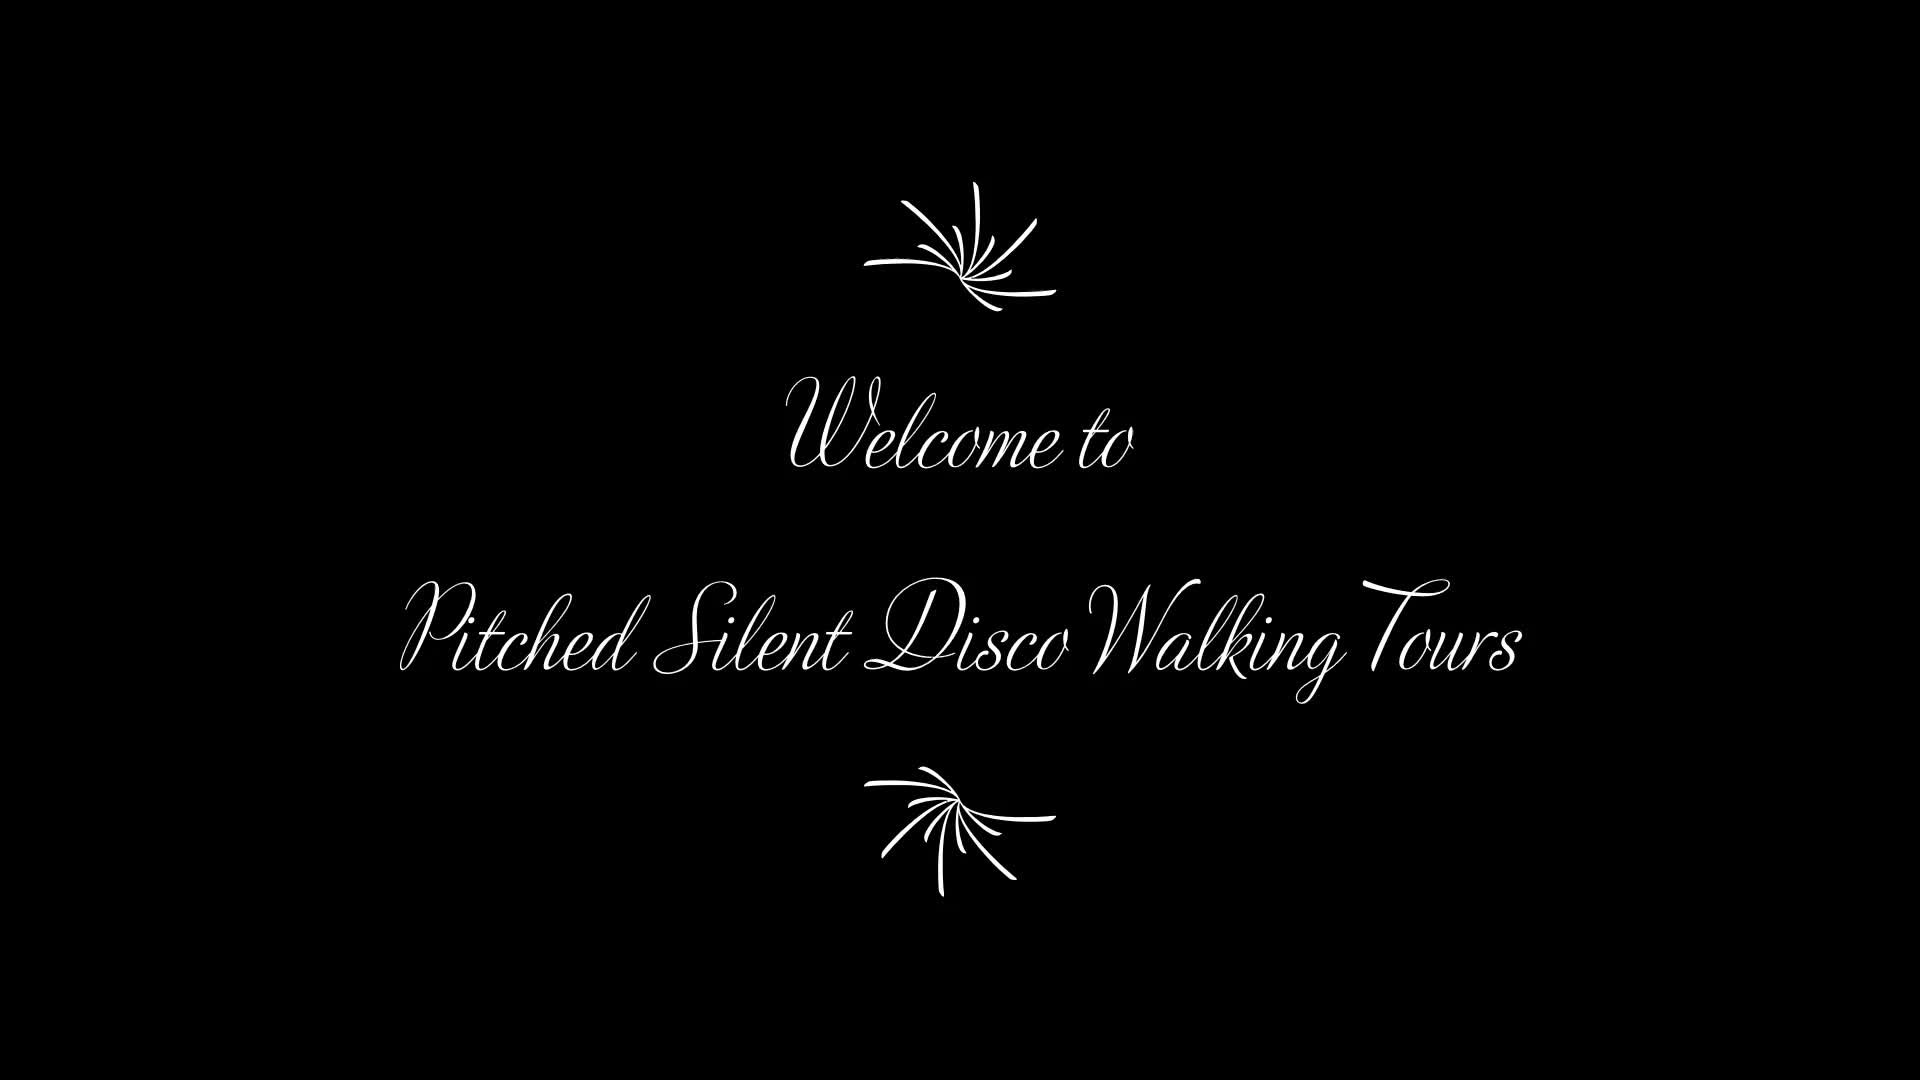 Welcome to Pitched Silent Disco Walking Tours